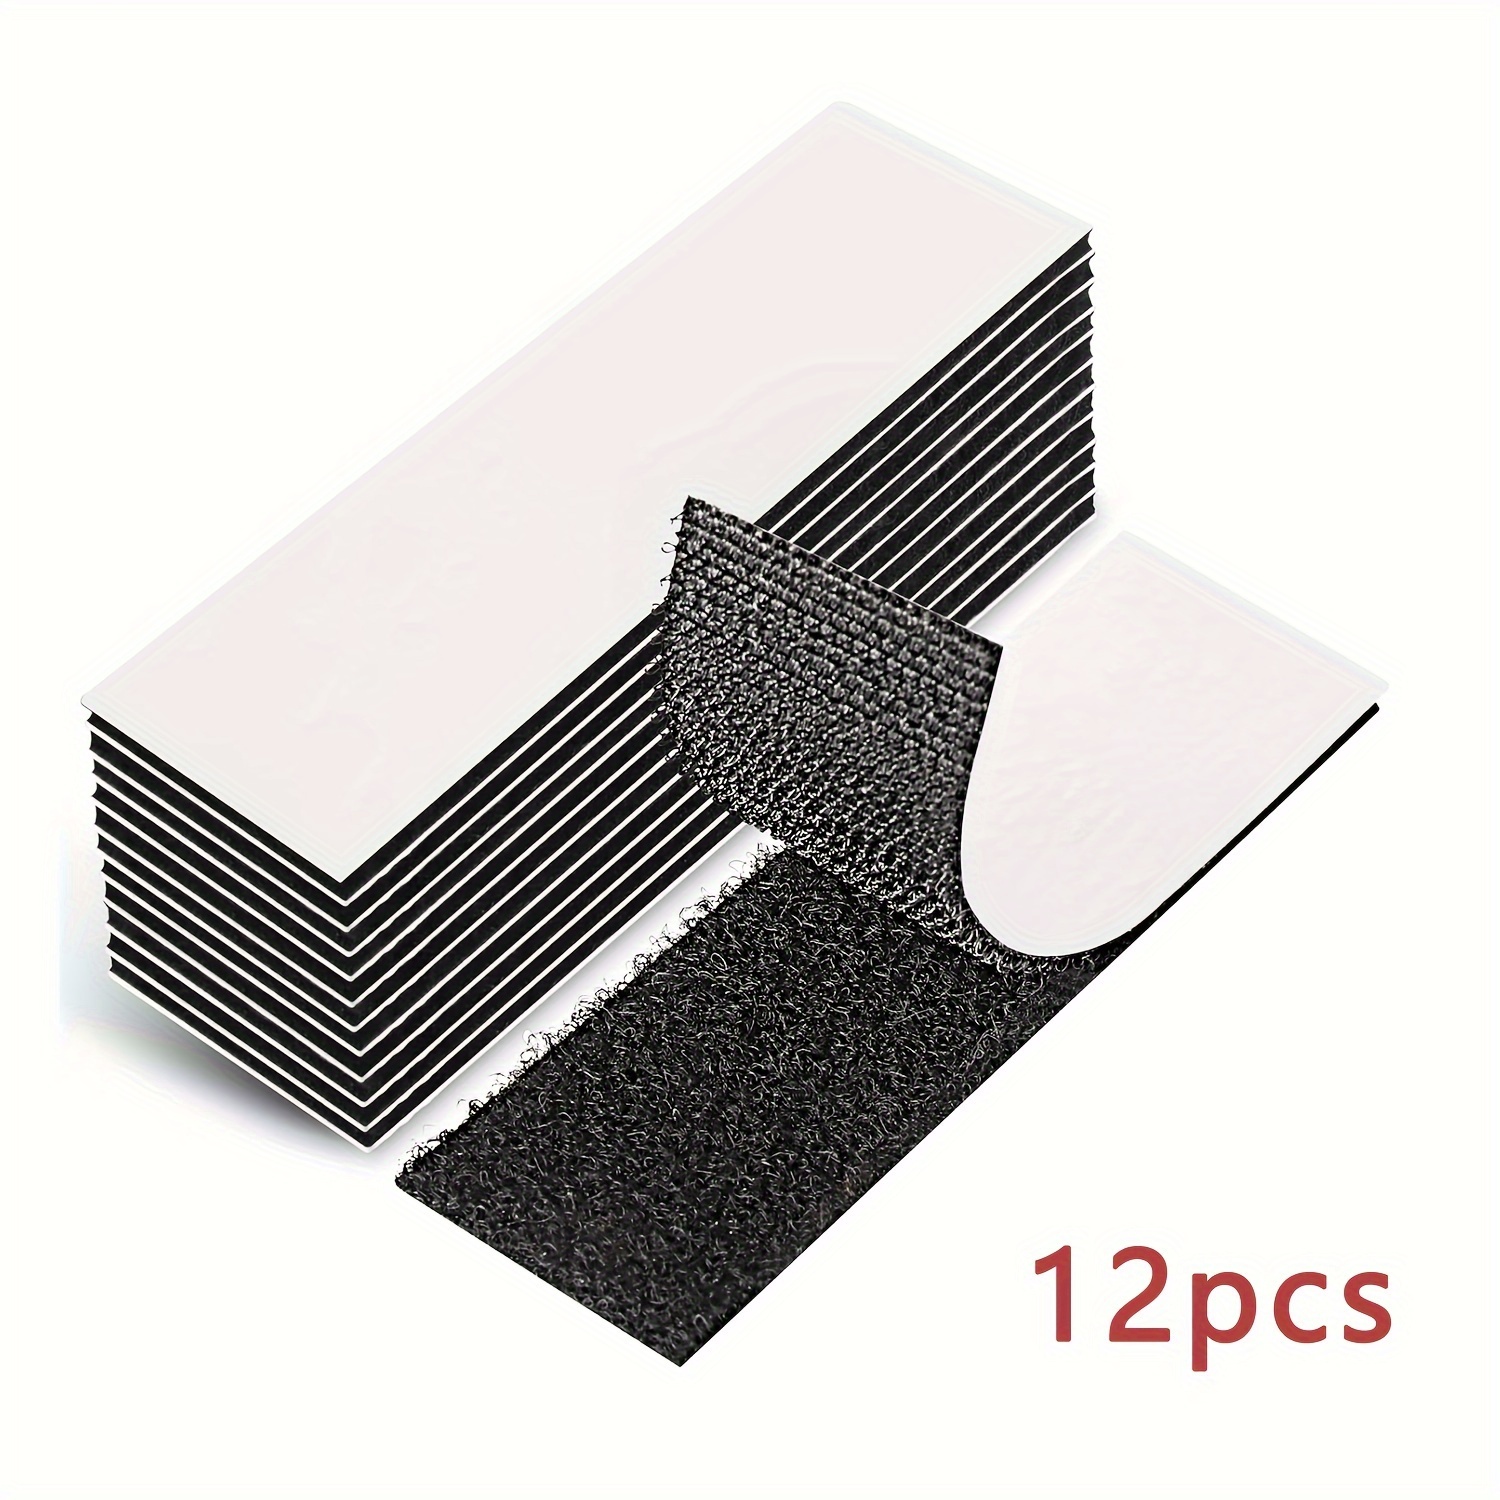 

12-piece Strong Adhesive Hook And Loop Tape, 1x4 Inches - Durable Nylon Double-sided Mounting Strips For Secure Fastening